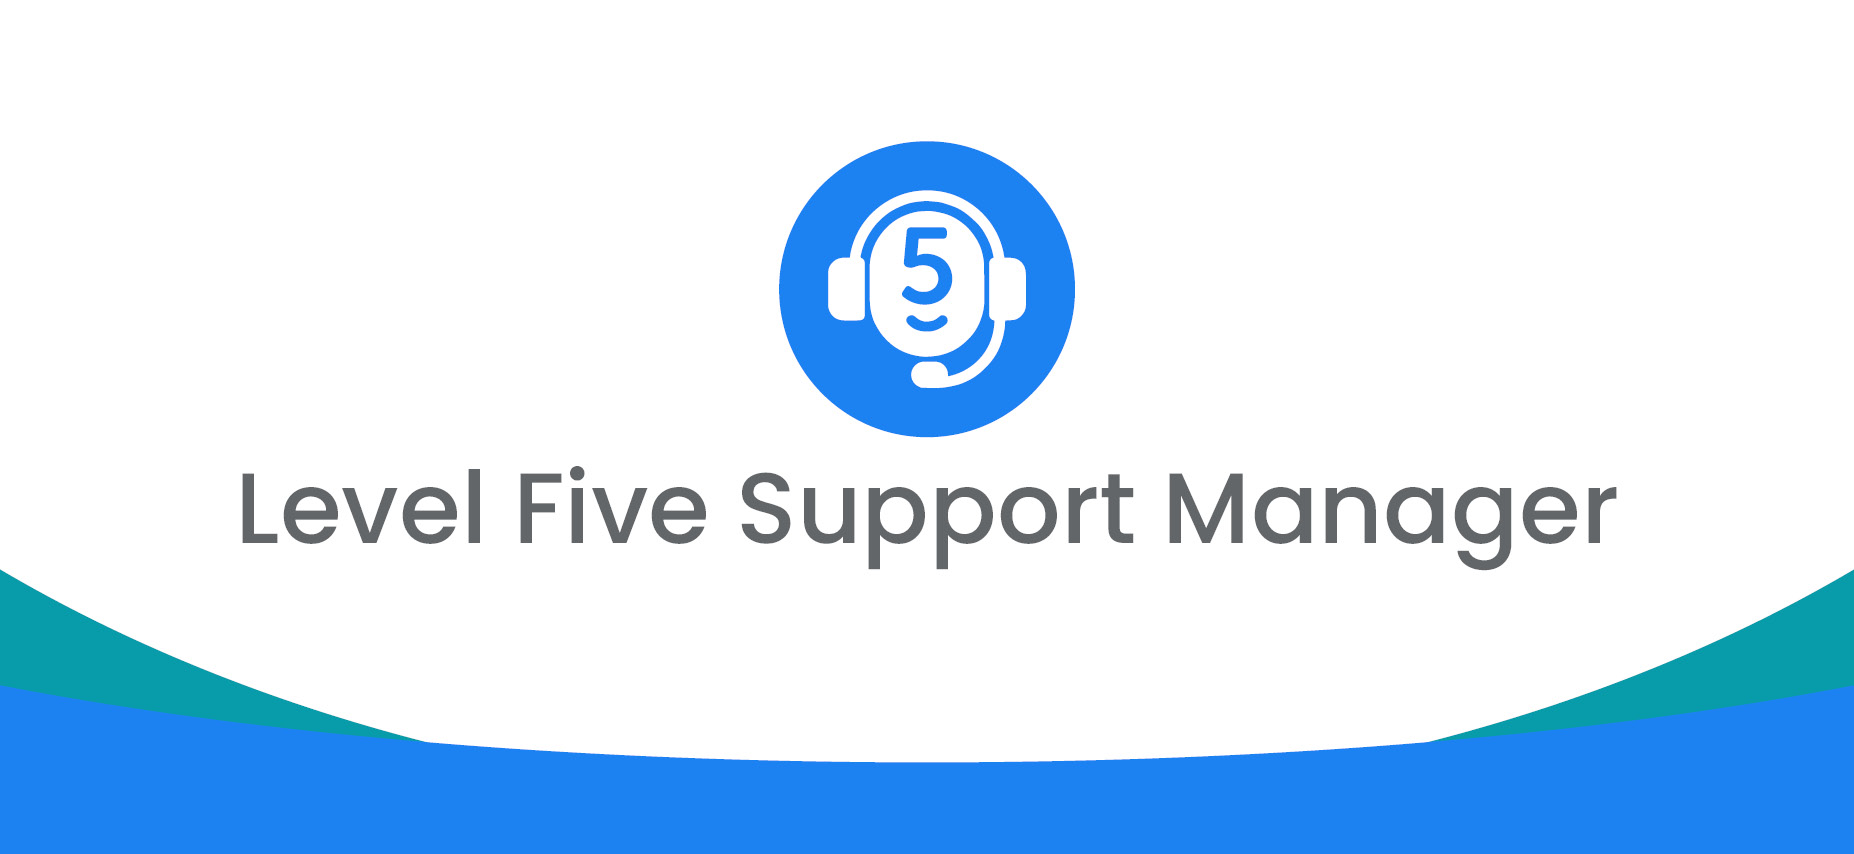 Level Five Contact Center Support Manager